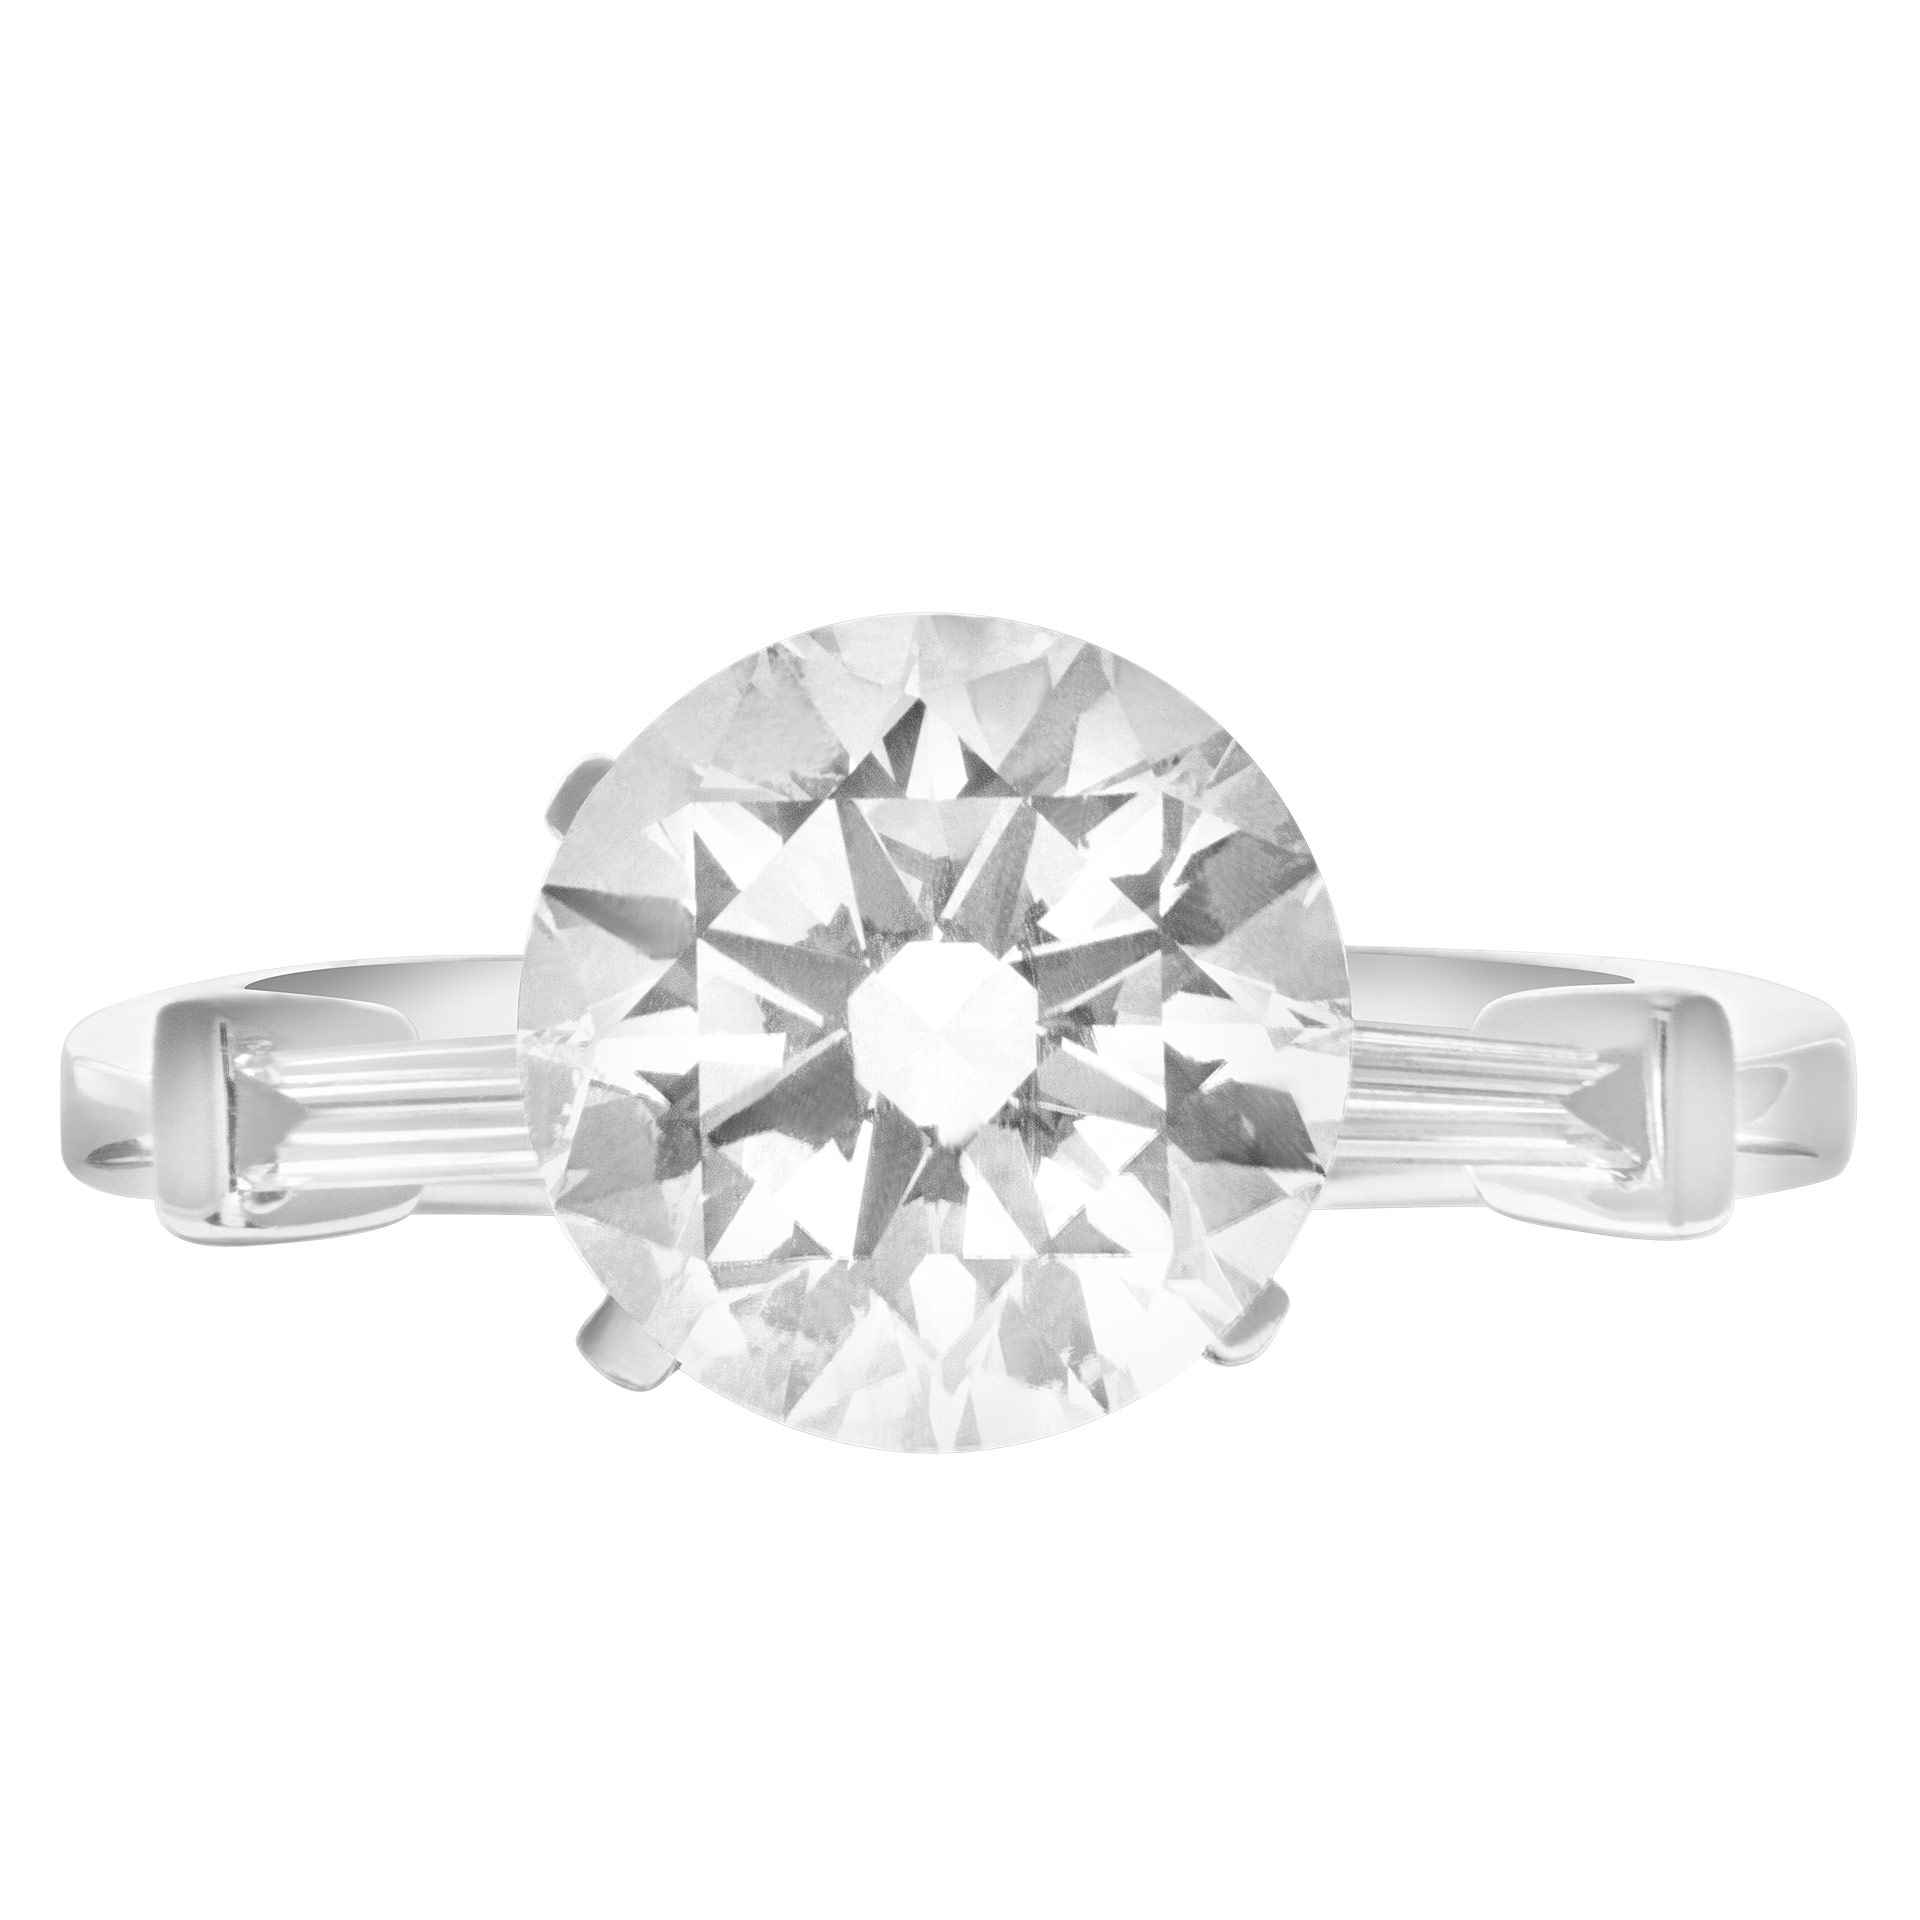 GIA certified 3.02 carat round brilliant diamond ring (I color, SI2 clarity) Size 6.5